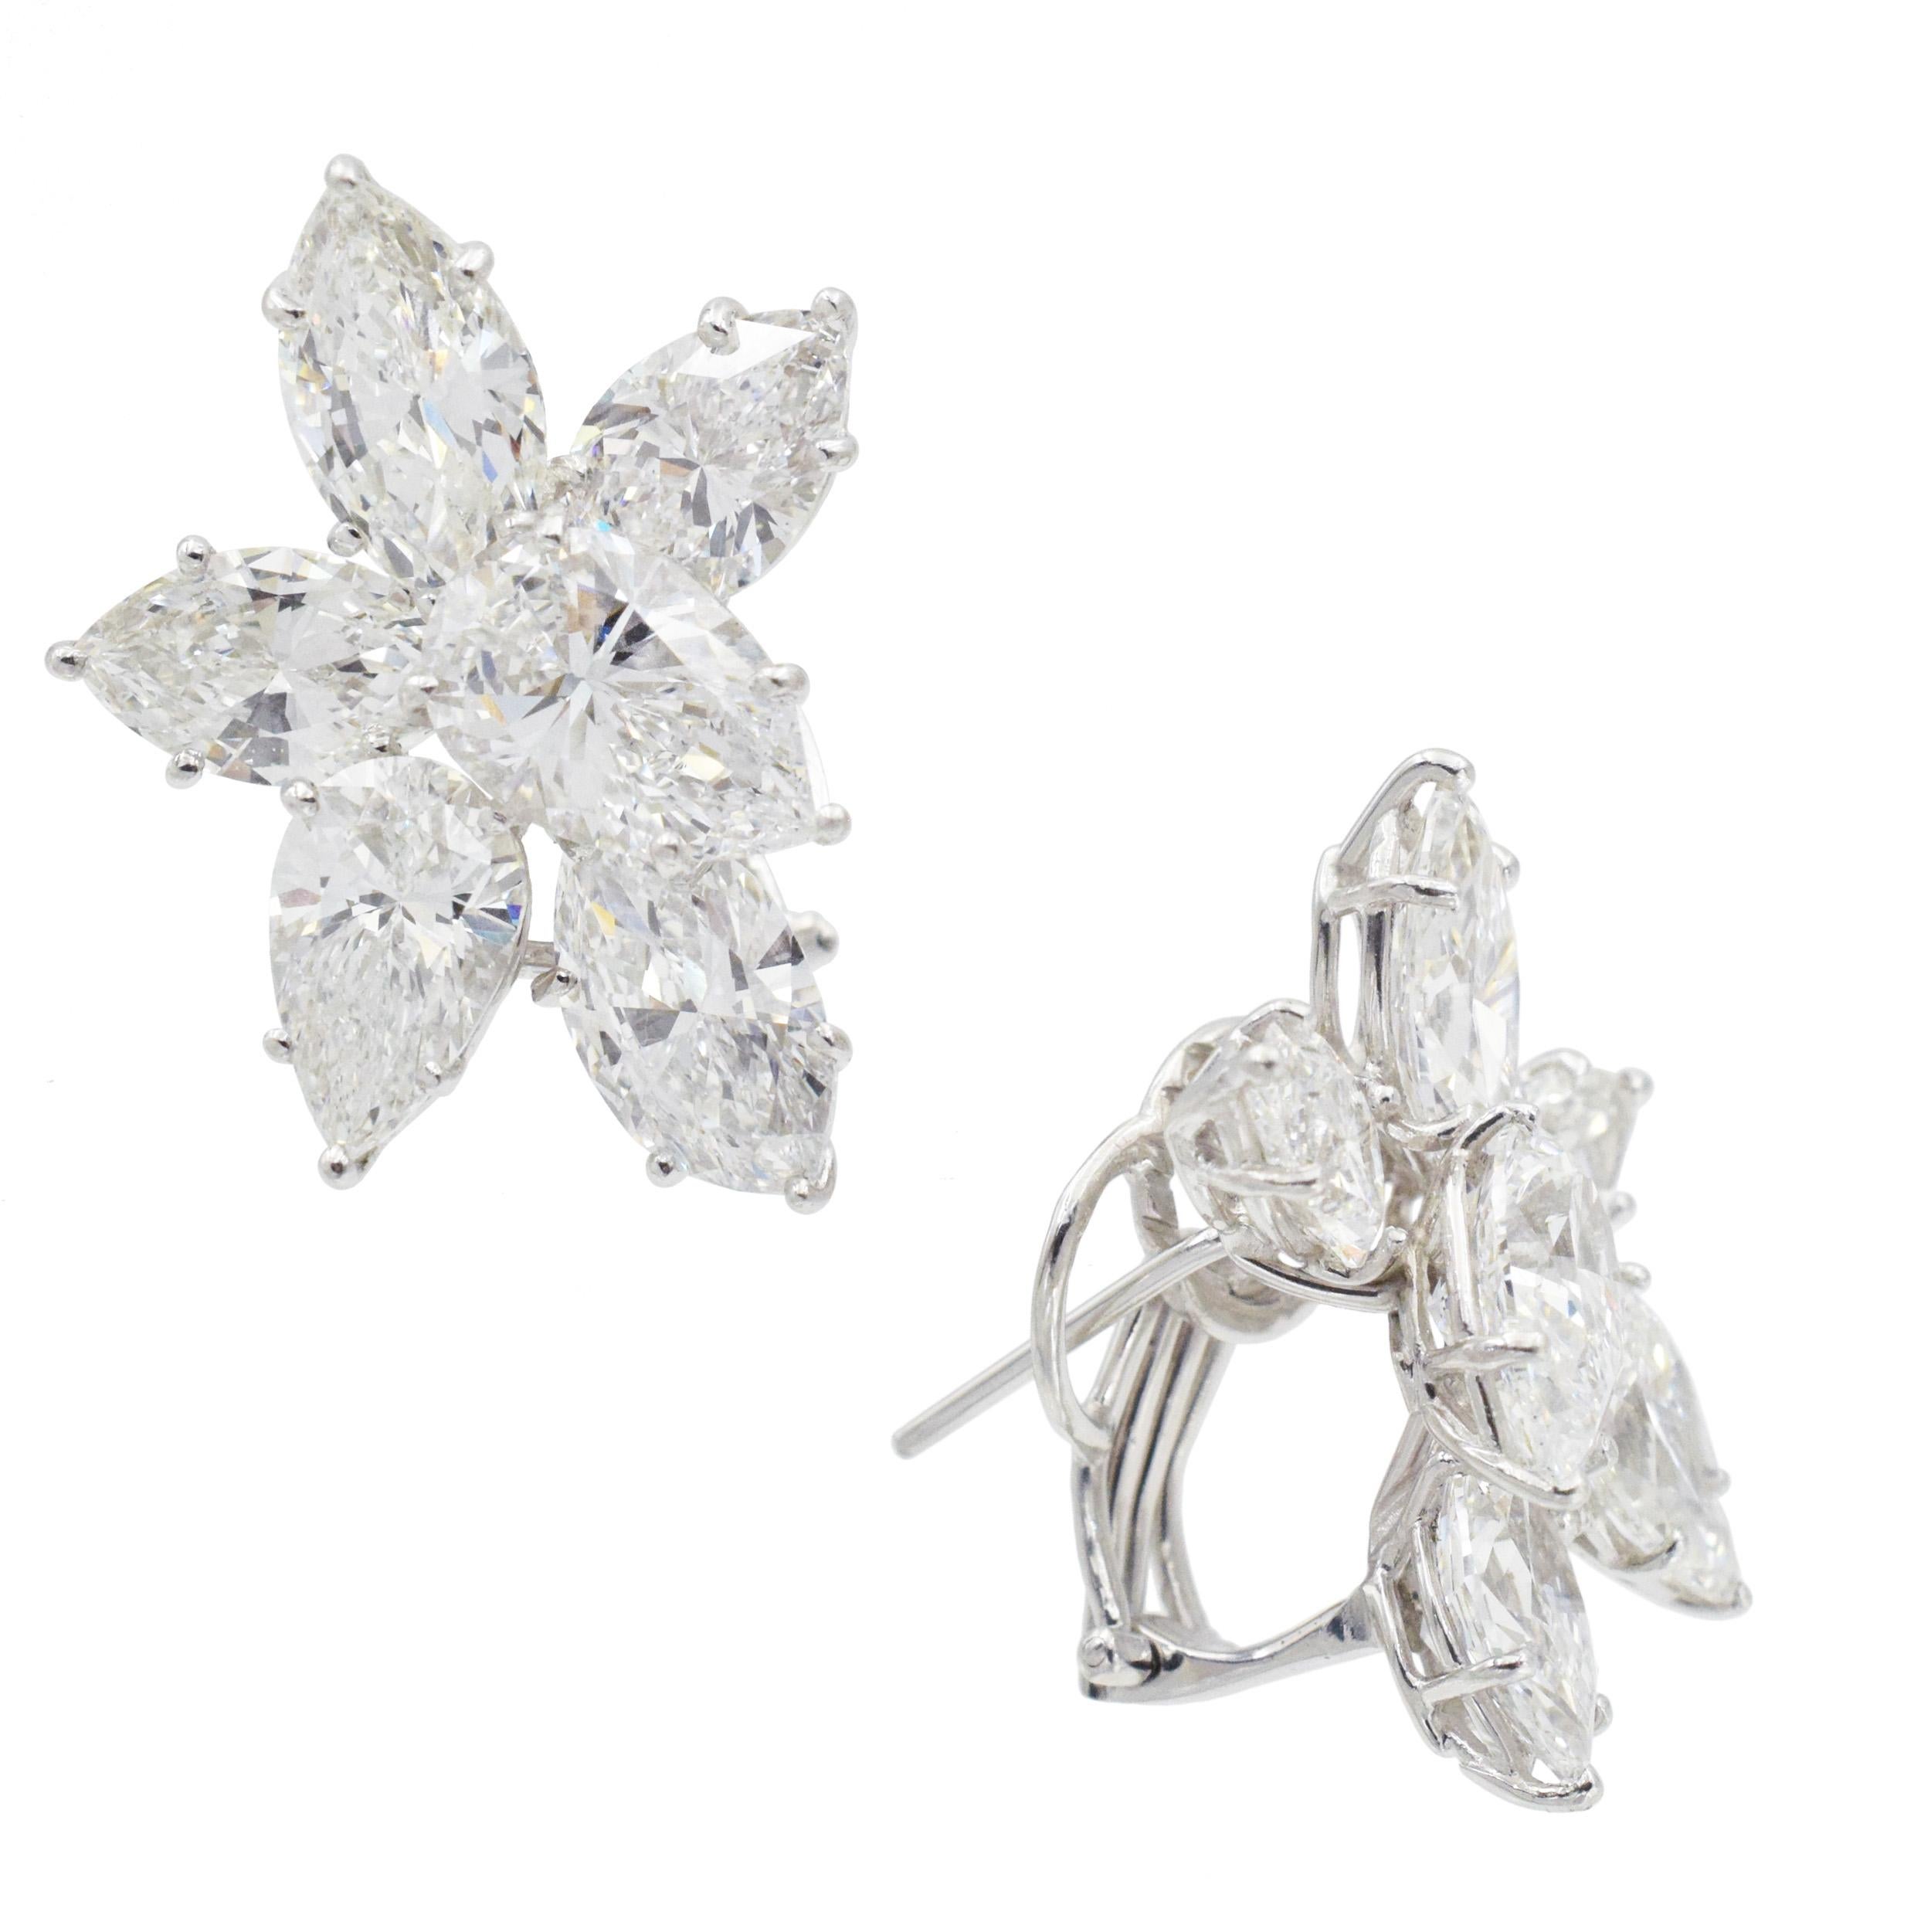  Harry Winston Diamond Cluster Earrings. In Excellent Condition For Sale In New York, NY